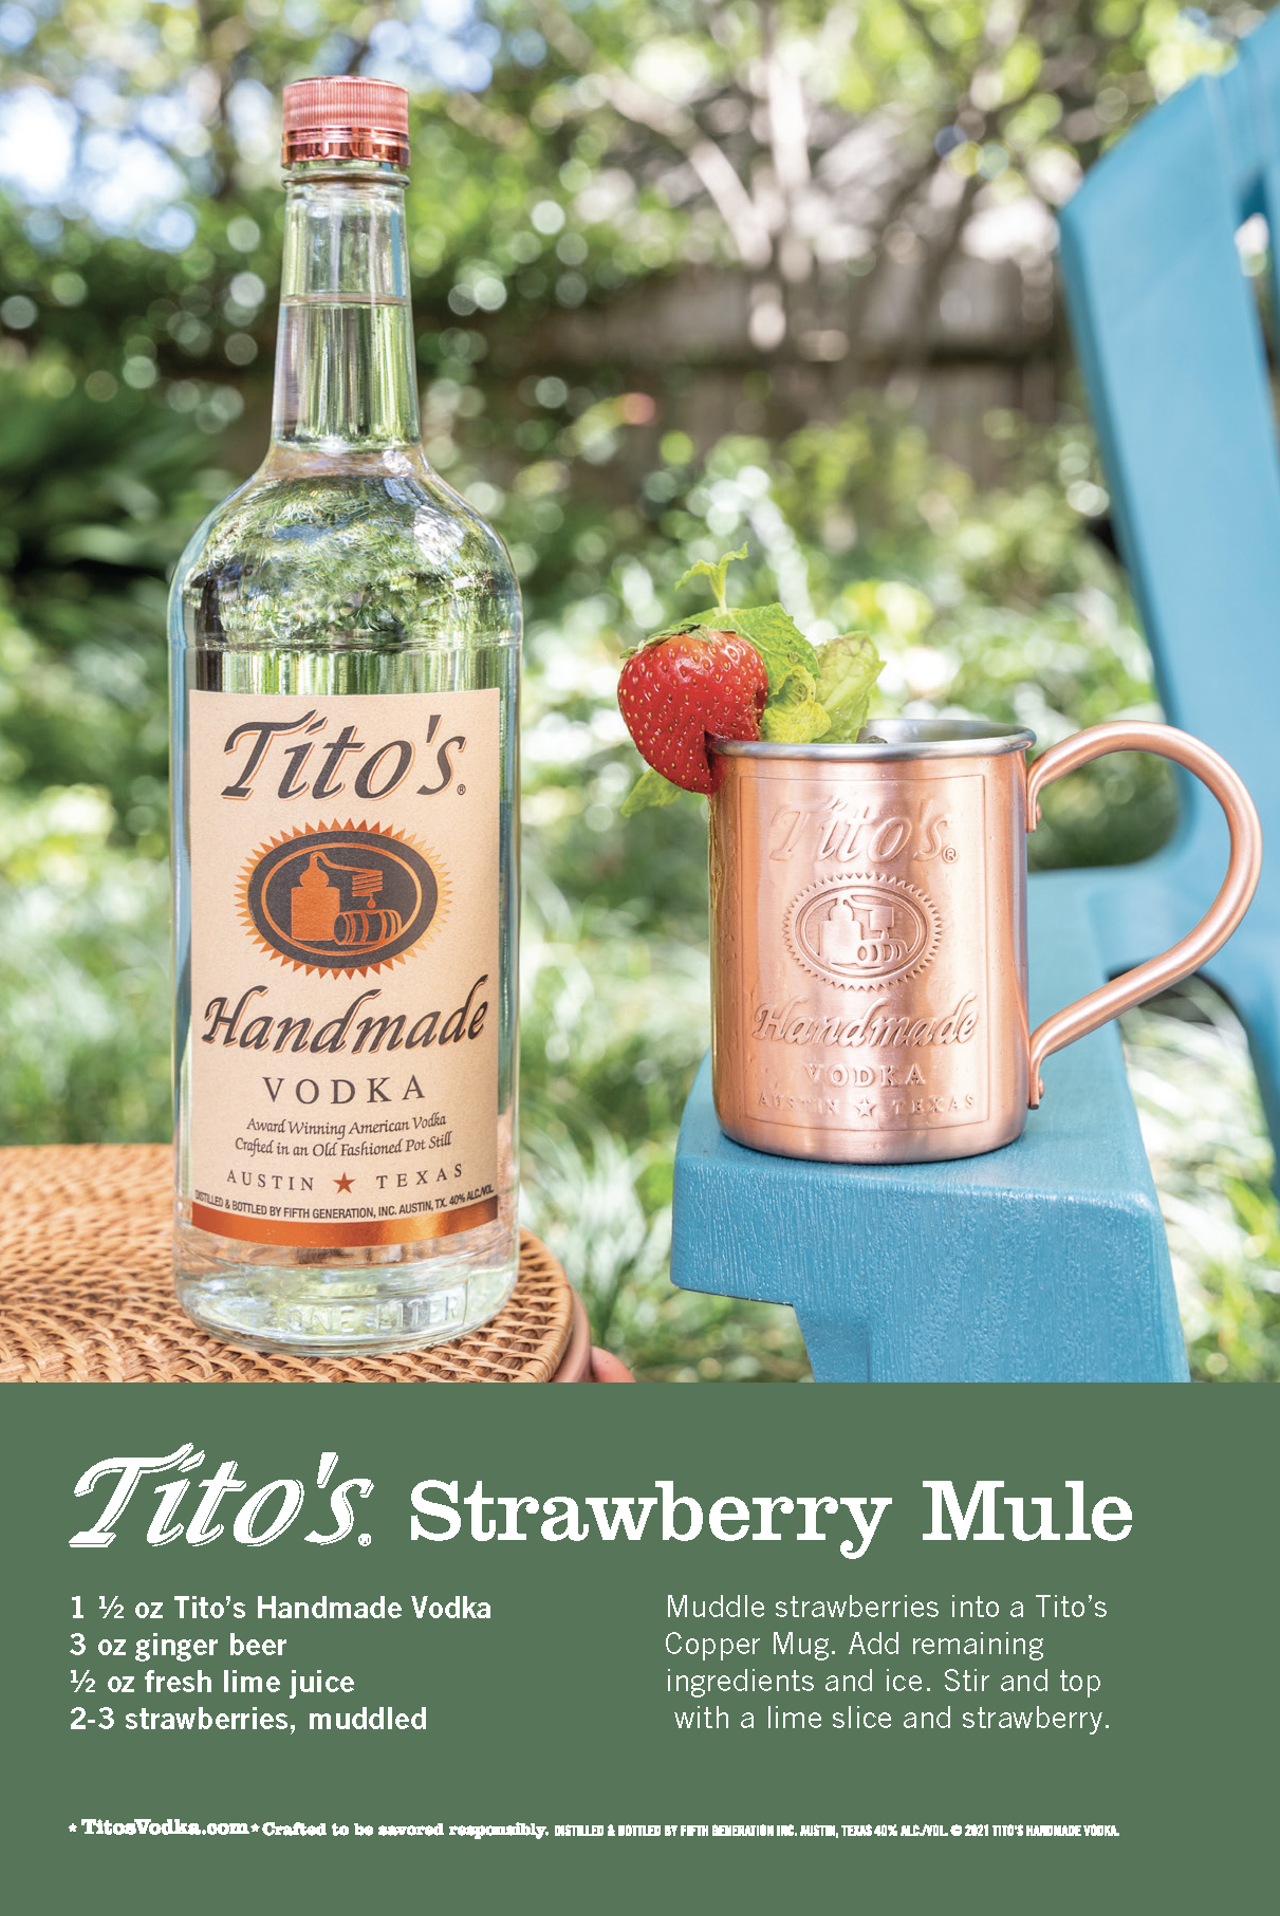 Strawberry Mule
Try more Tito's Handmade Vodka cocktails here!